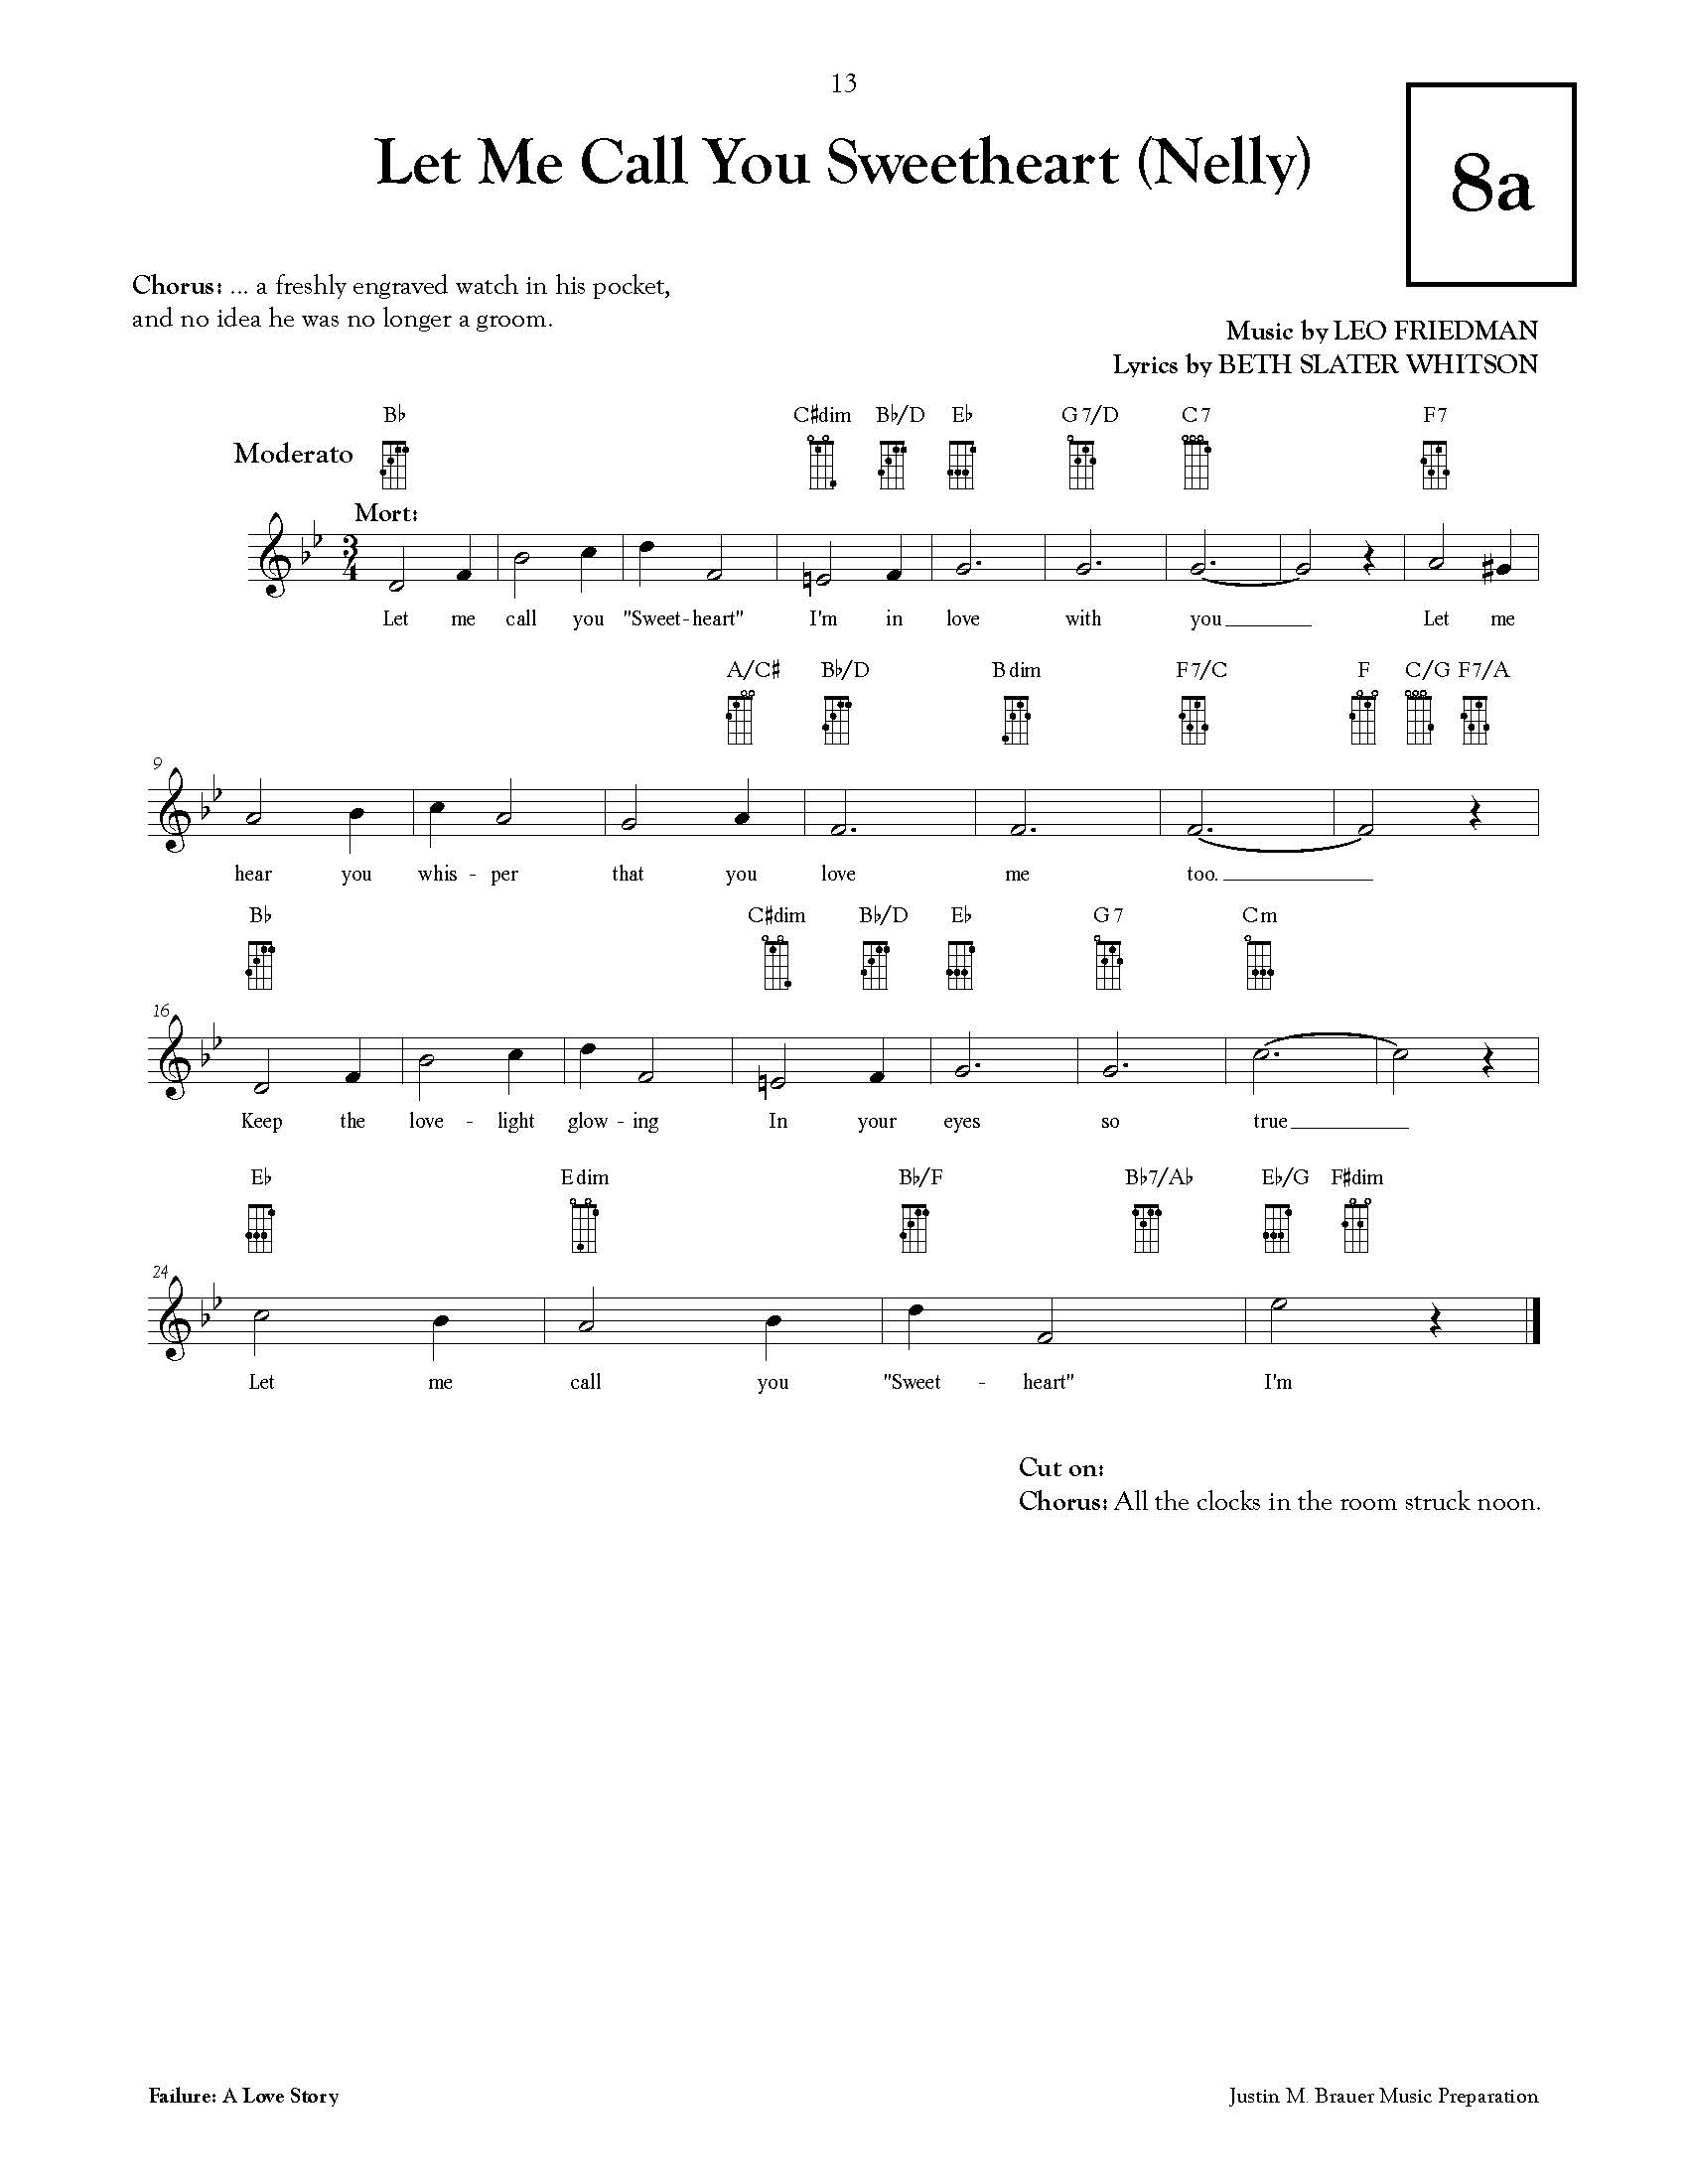 Failure A Love Story Vocal Score_Page_15.jpg